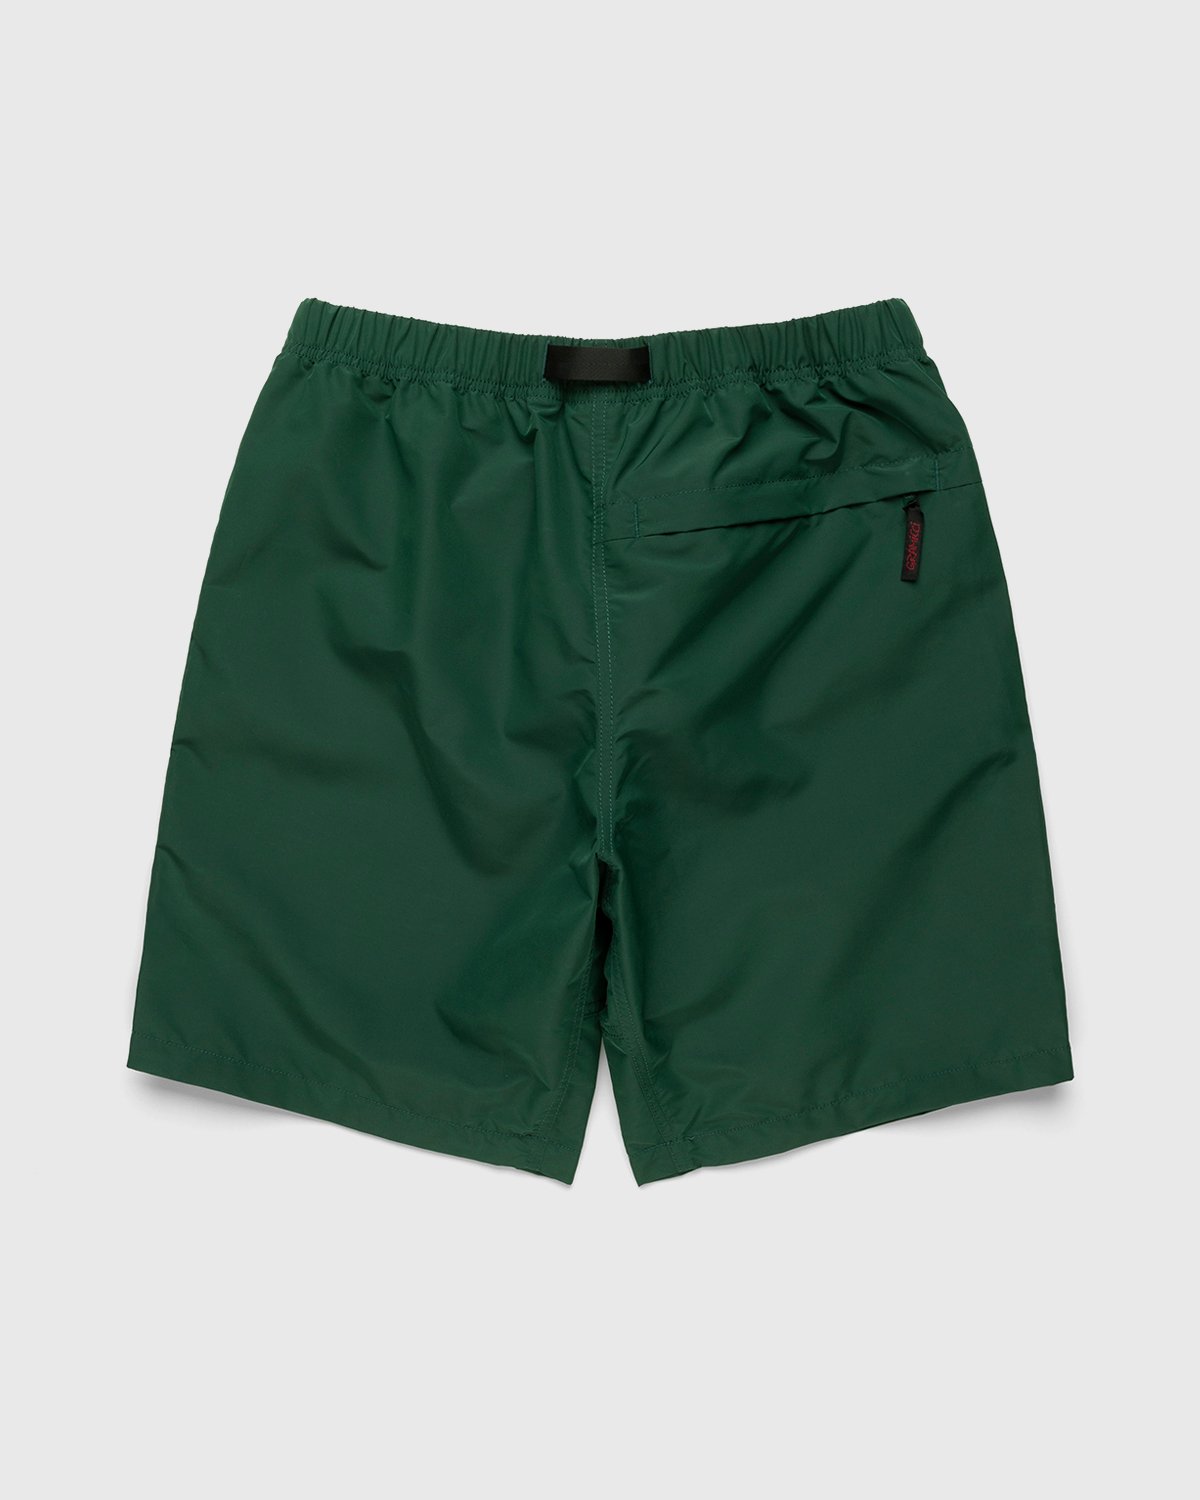 Gramicci x Highsnobiety - HS Sports Shell Packable Shorts Forest Green - Clothing - Green - Image 2